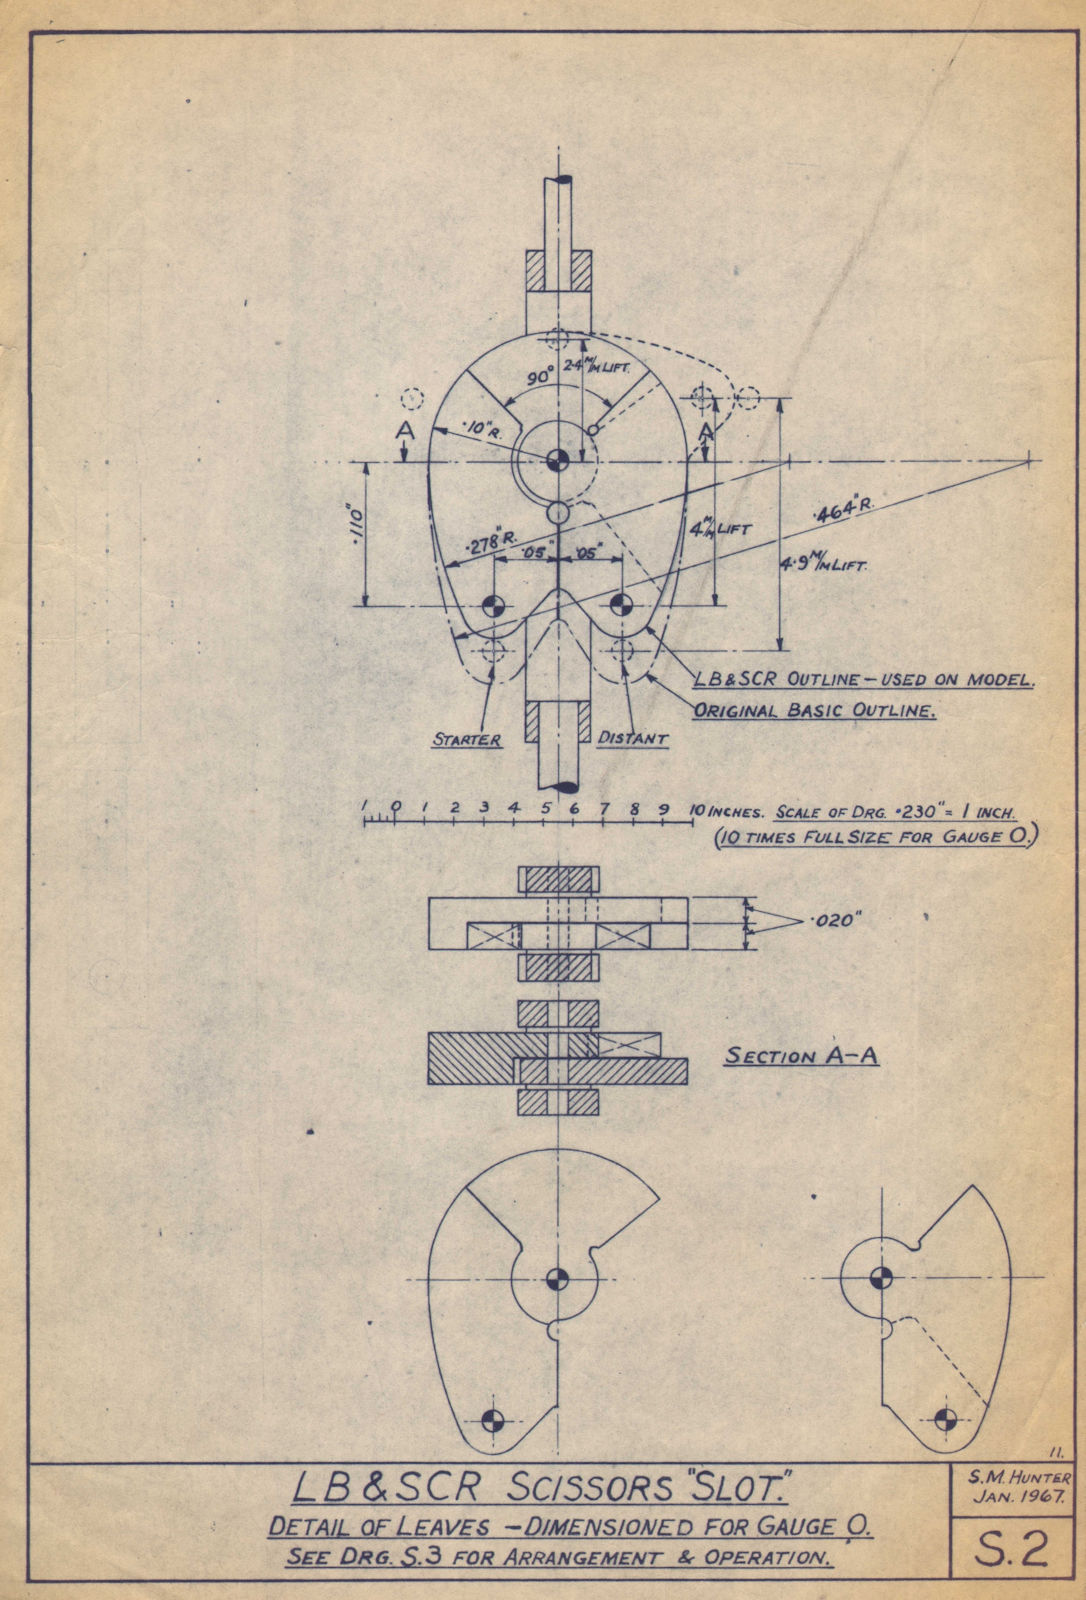 Associate Product LB & SCR Scissors "Slot". Details of leaves. Engineering drawing 1967 print